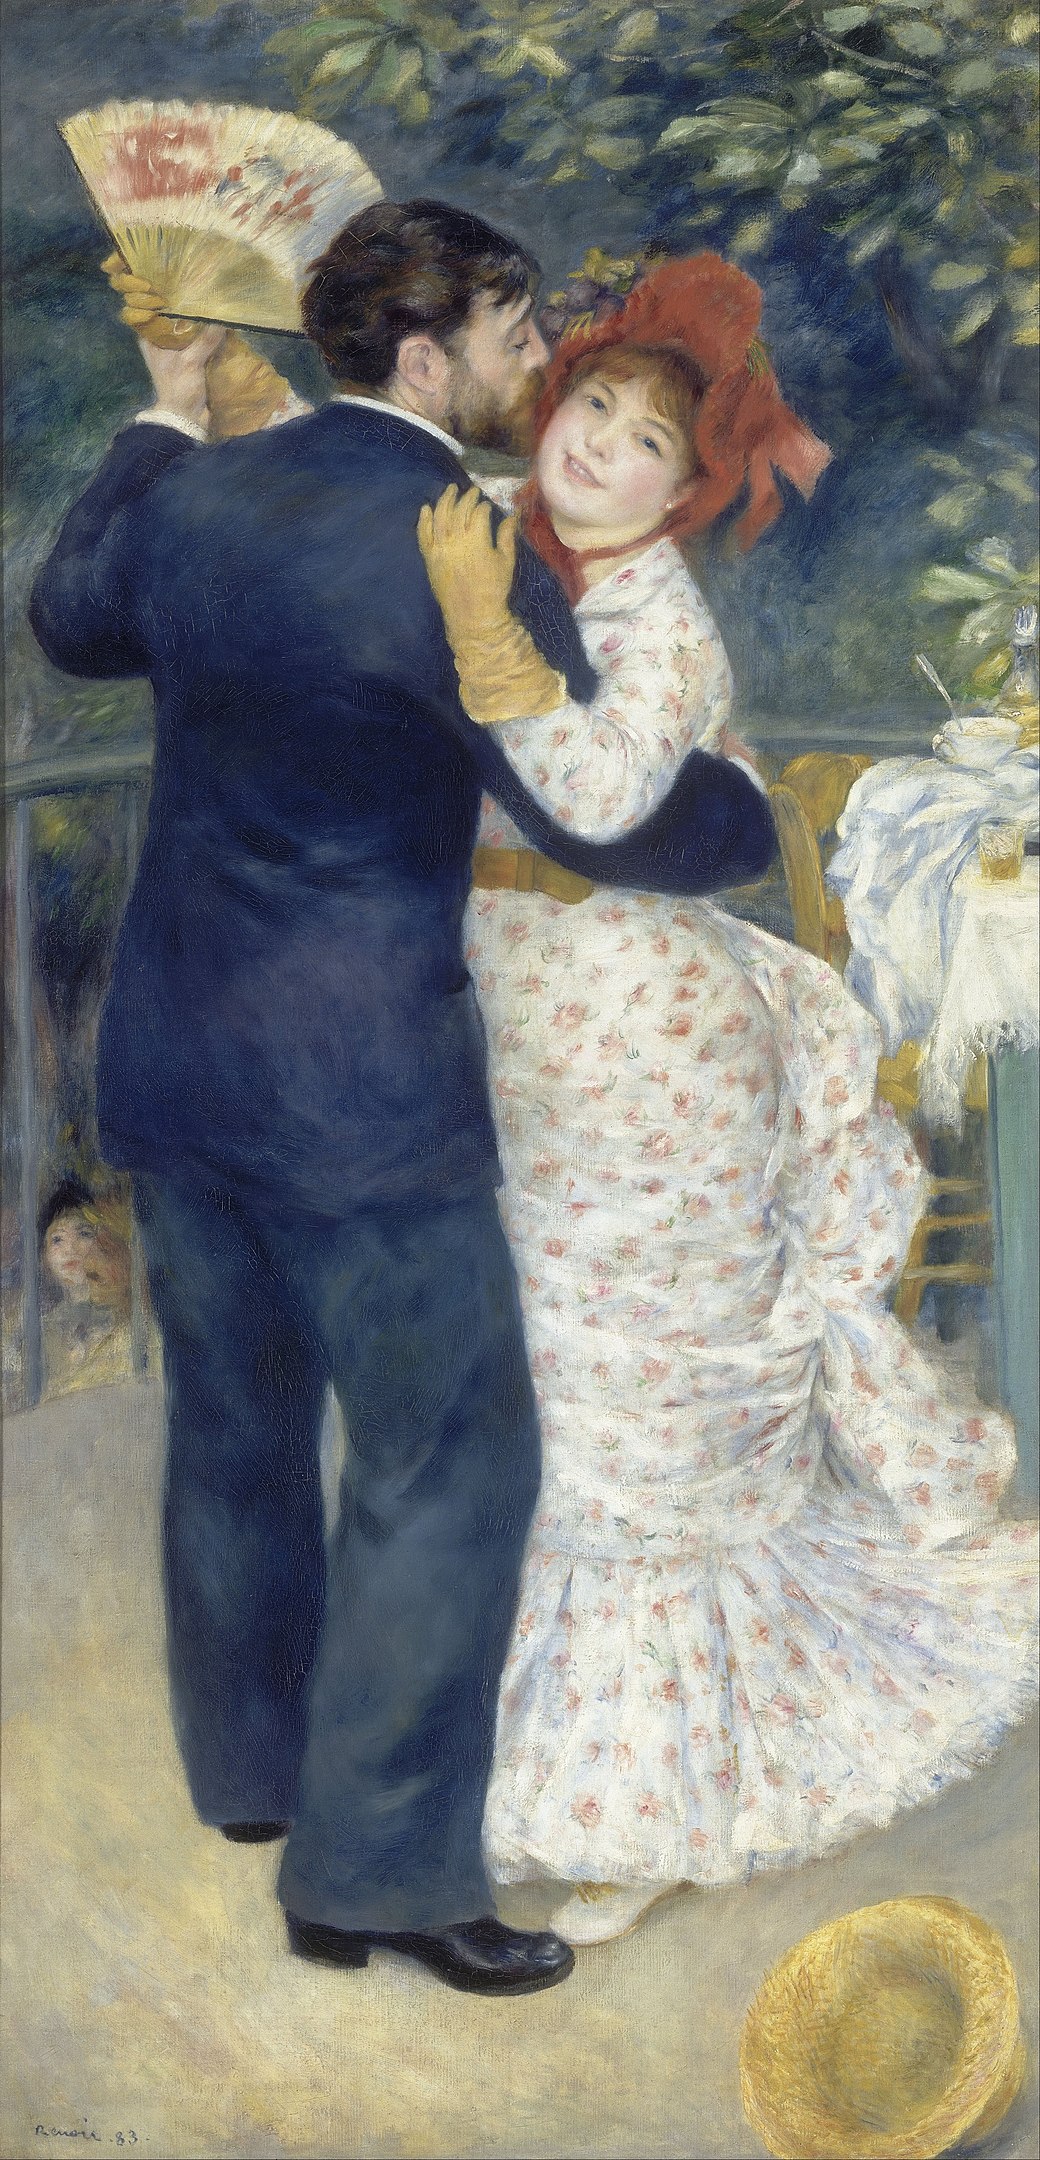 Dance in the Country by Pierre-Auguste Renoir - 1883 - 180 x 90 cm Musée d'Orsay